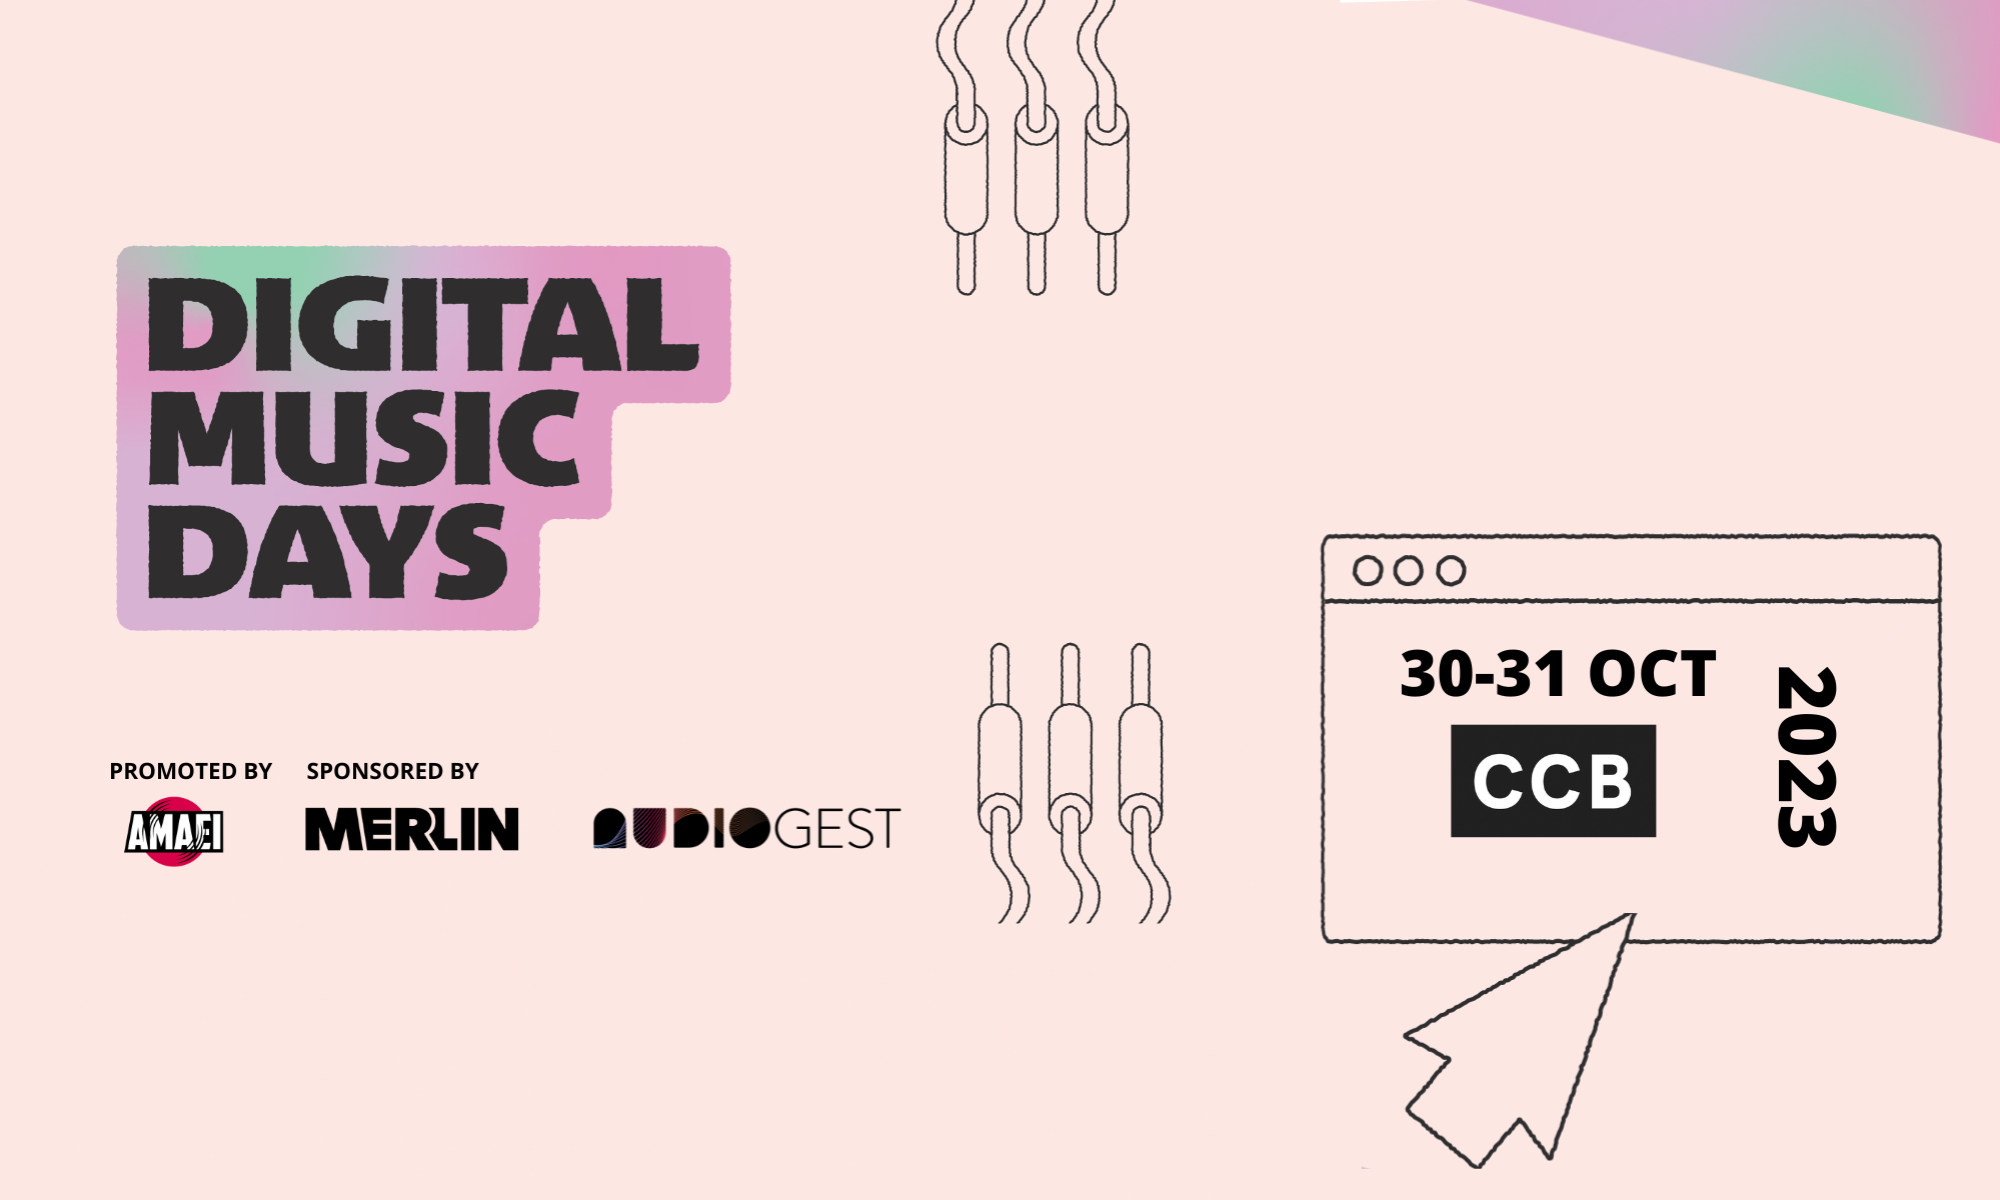 Digital Music Days in 2023, 5th Edition of DMD, In CCB